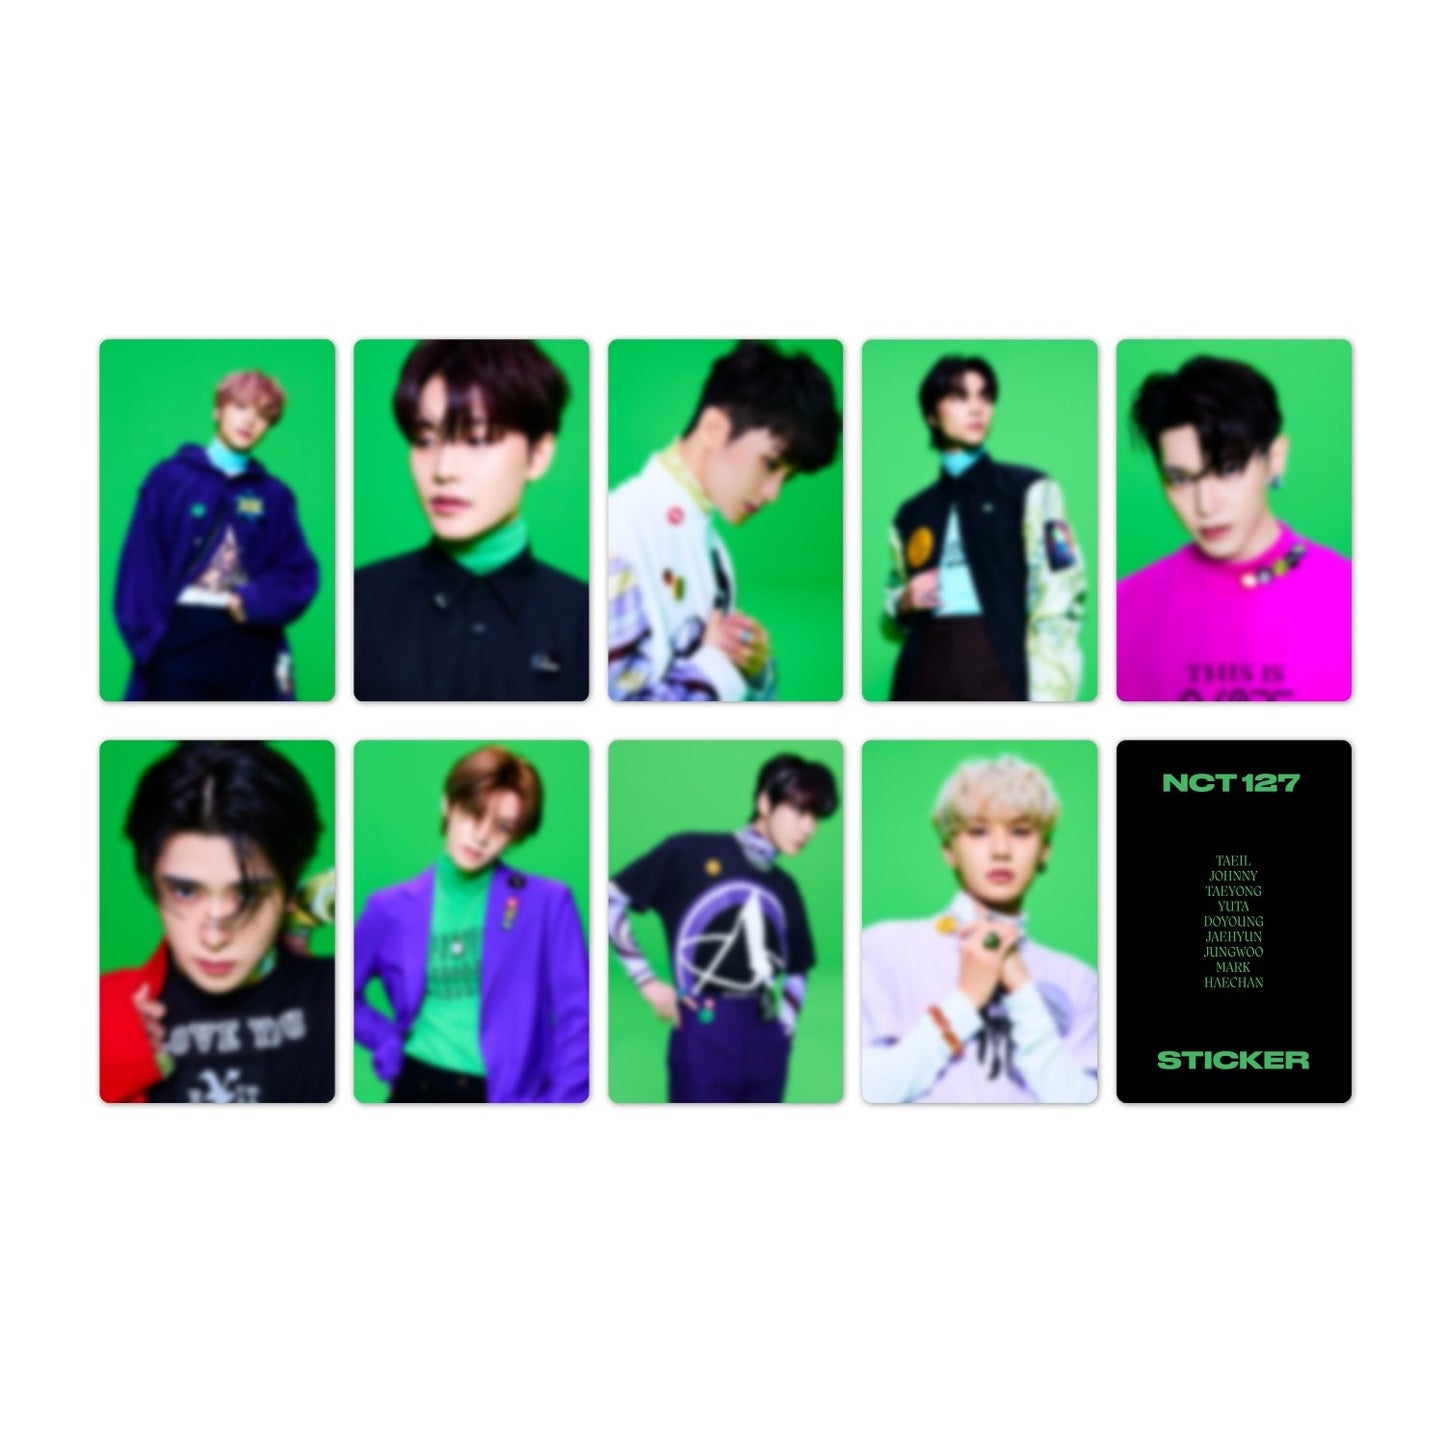 NCT 127 The 3rd Album STICKER Short Sleeve T-Shirts Deluxe Box (Small)